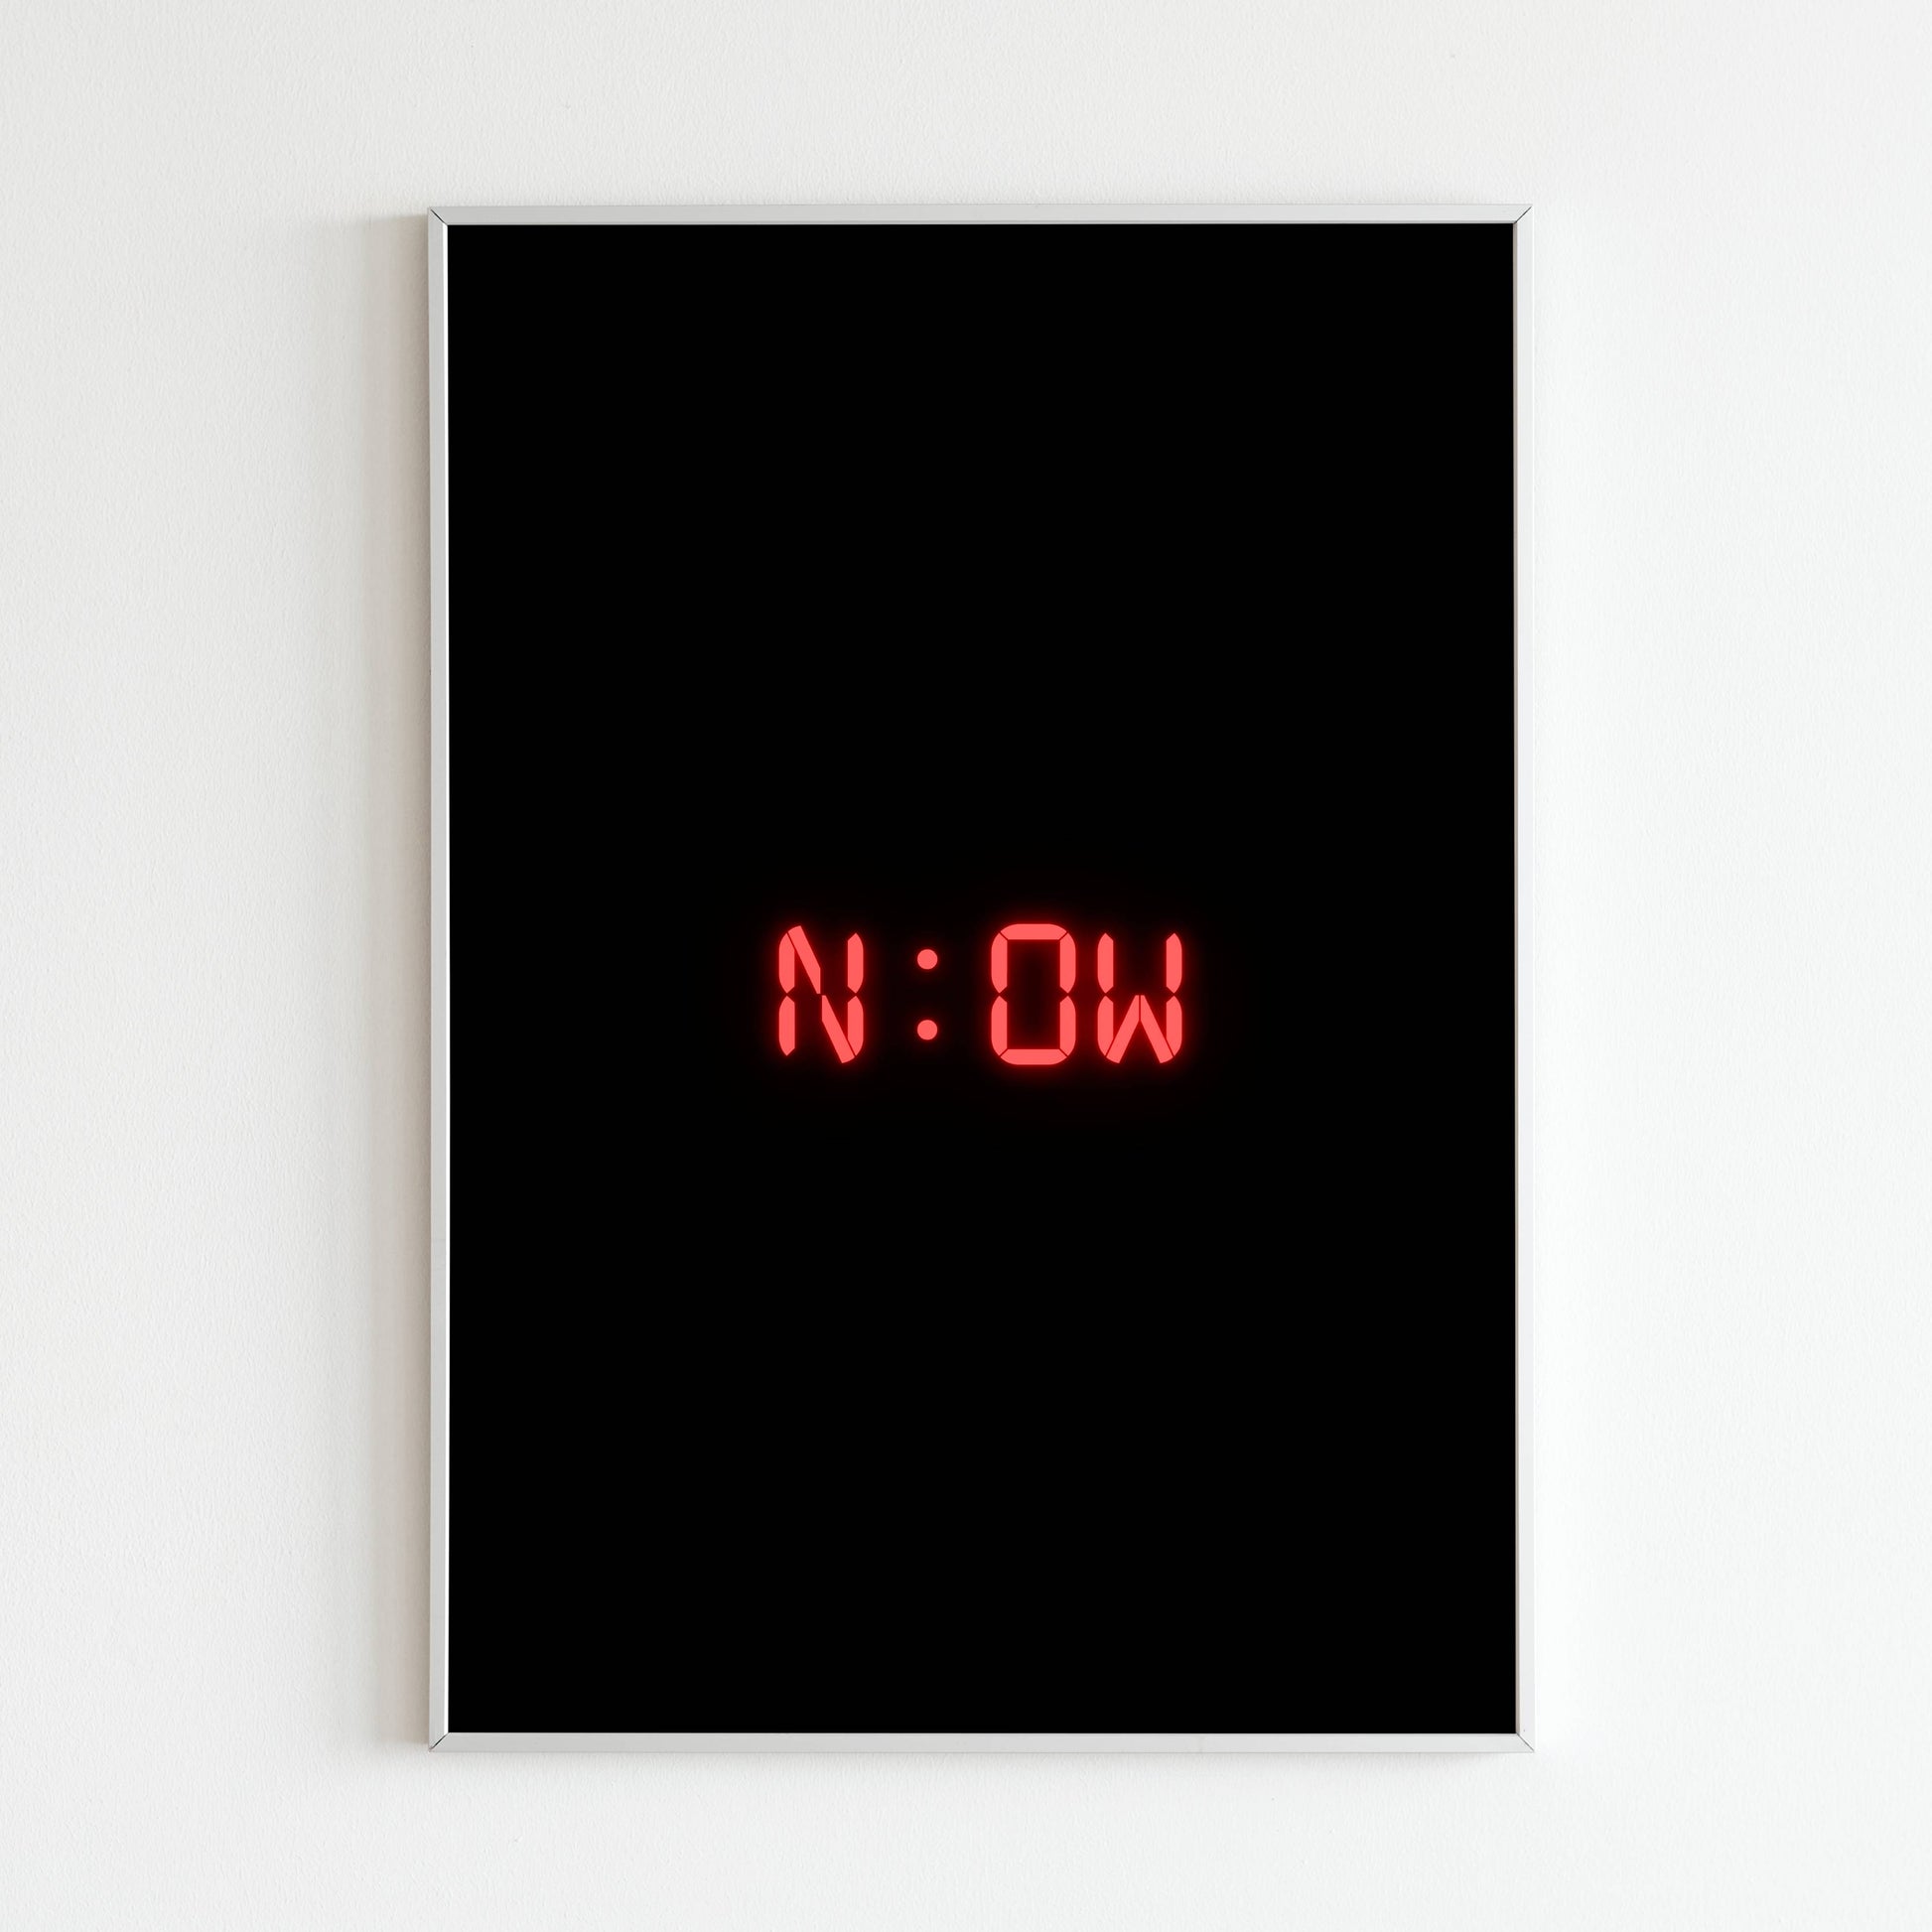 N:OW - Printed Wall Art / Poster. This beautiful poster adds a touch of sophistication to your space. Arrives ready to hang.